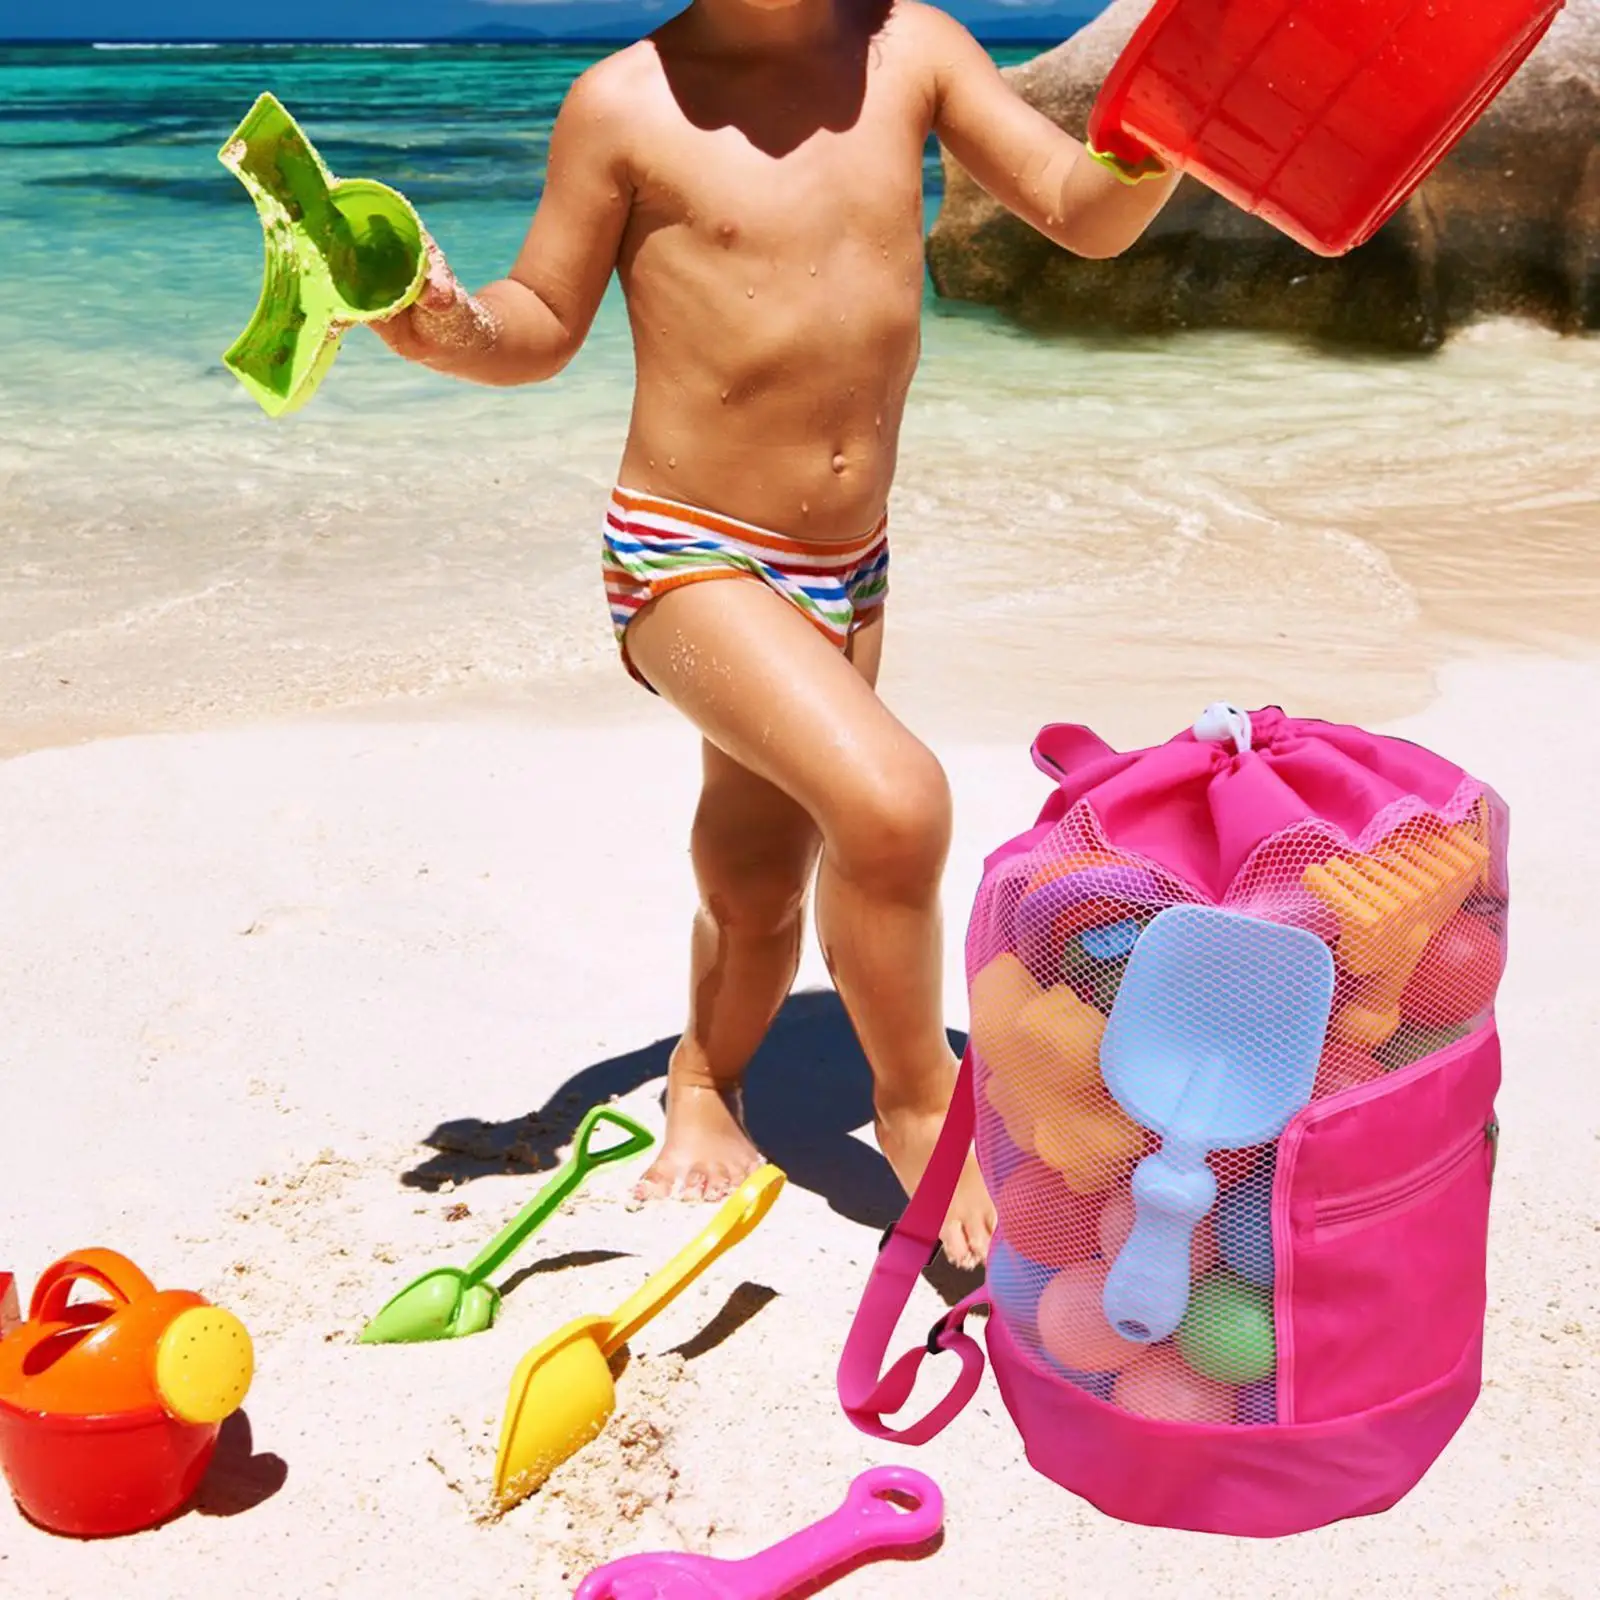 Kids Lightweight Shell Collecting Bag for Picnic Holiday Fittings